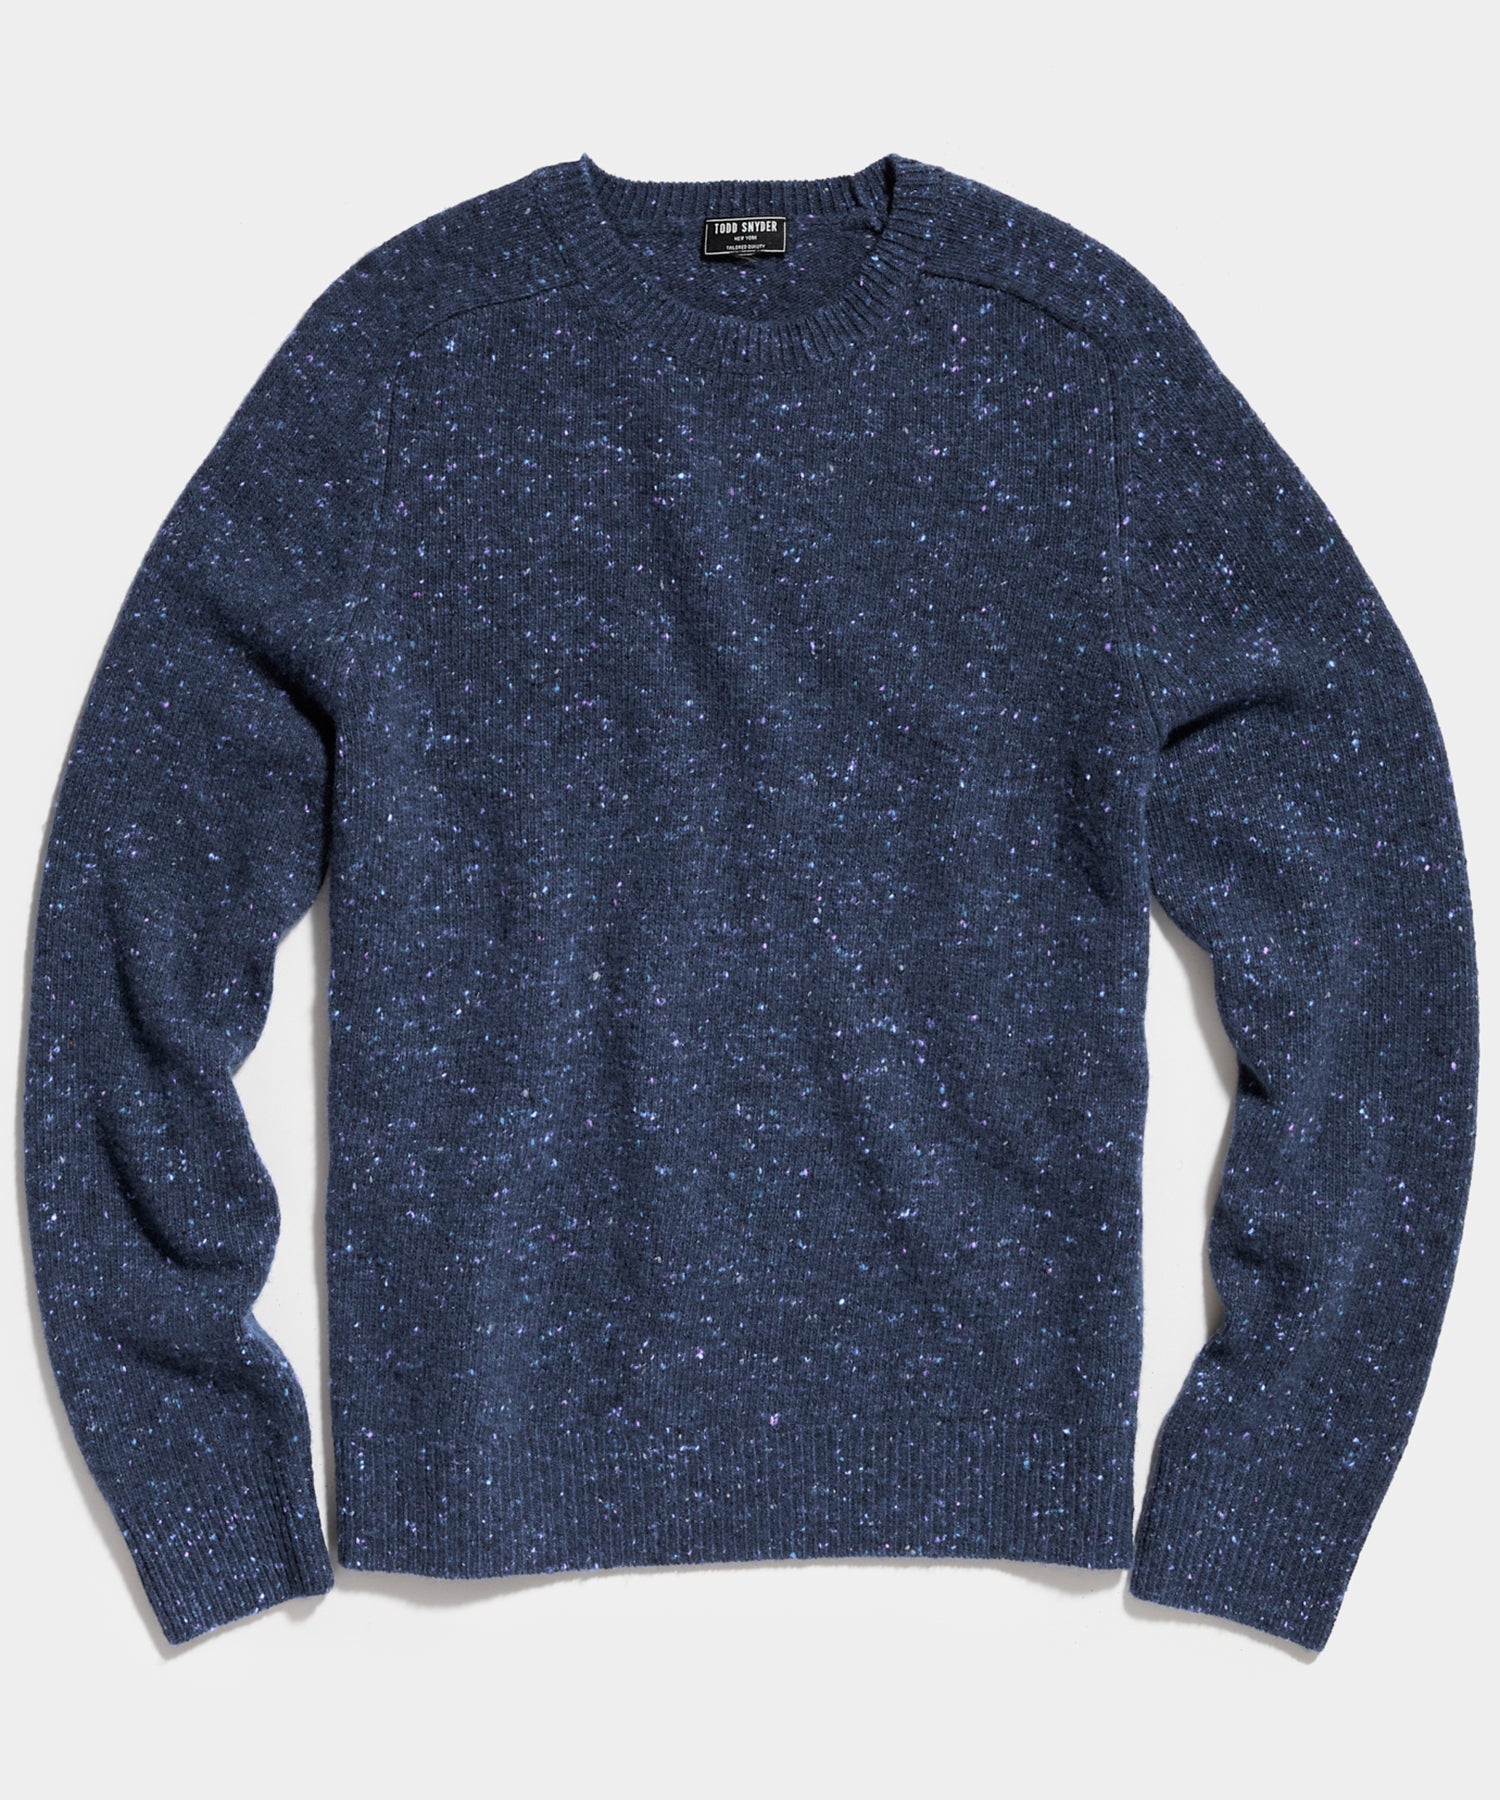 Donegal Crewneck Sweater in Navy